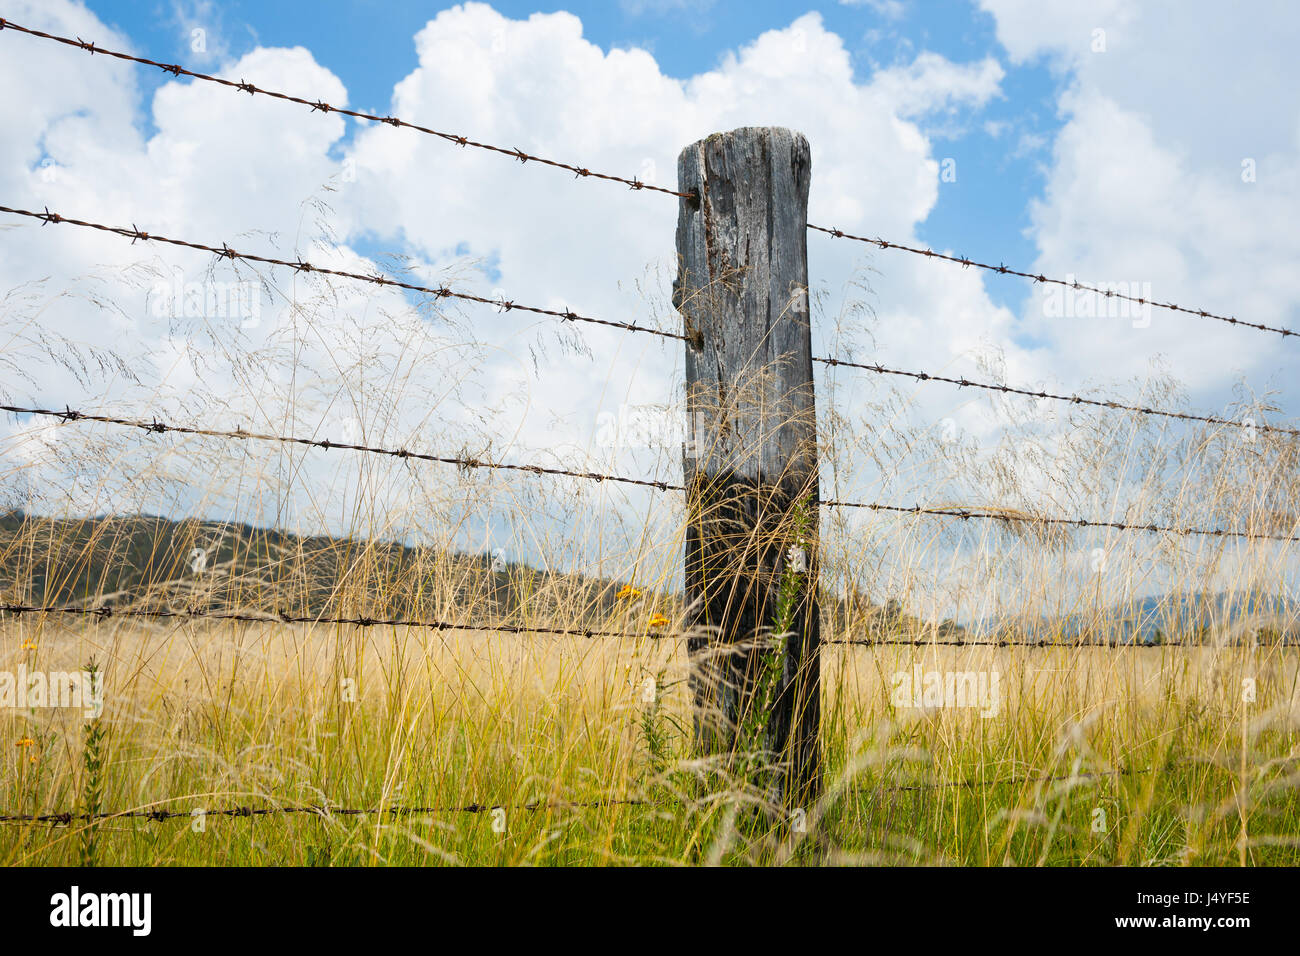 Rustic fence post and barbed wire fence in agriculture image from low angle Stock Photo